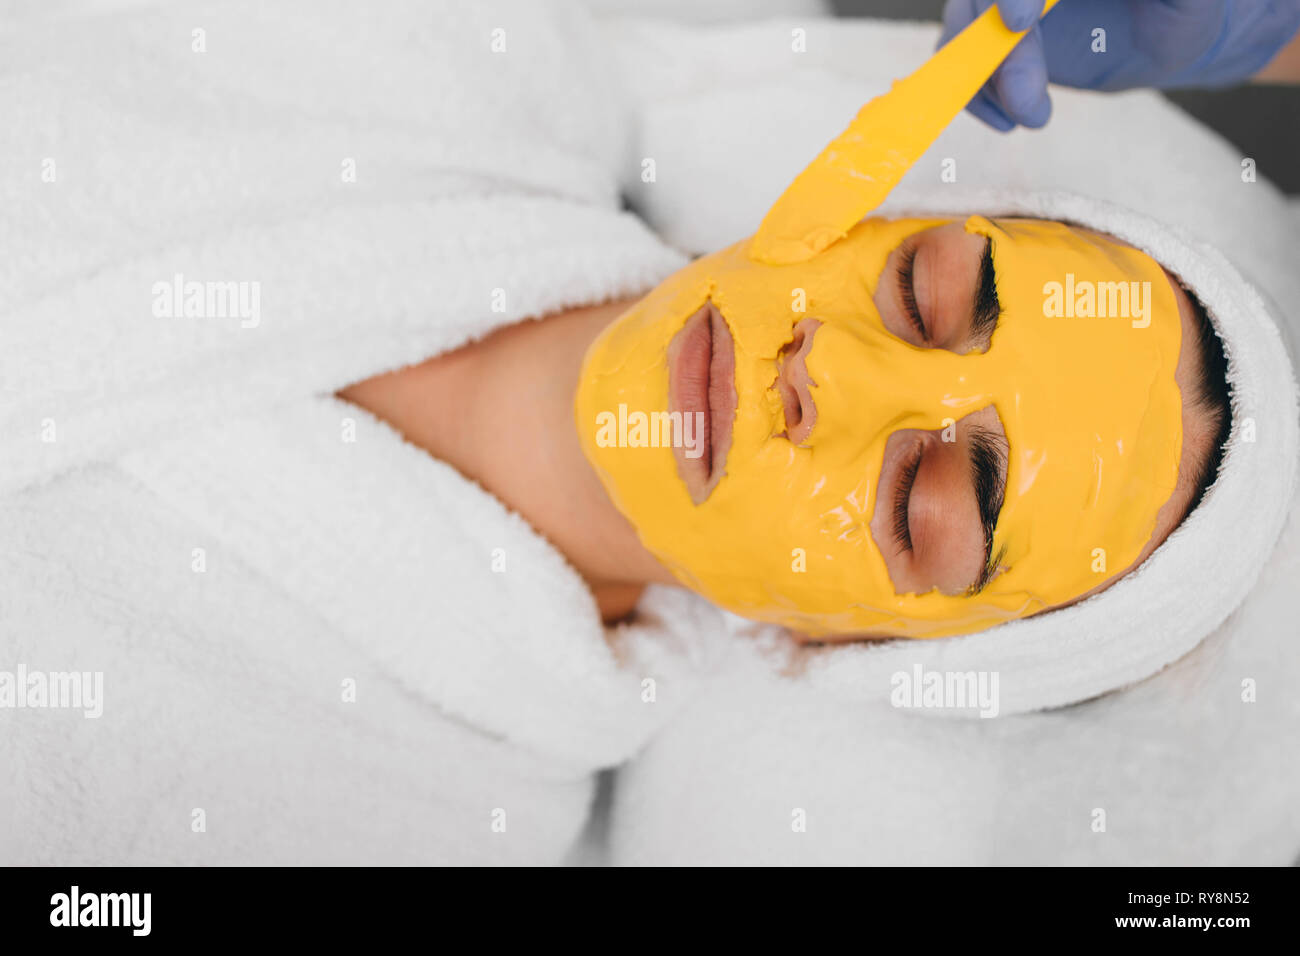 Beautician applying facial mask with orange extract on beautiful female face. Herbal Medicine Stock Photo